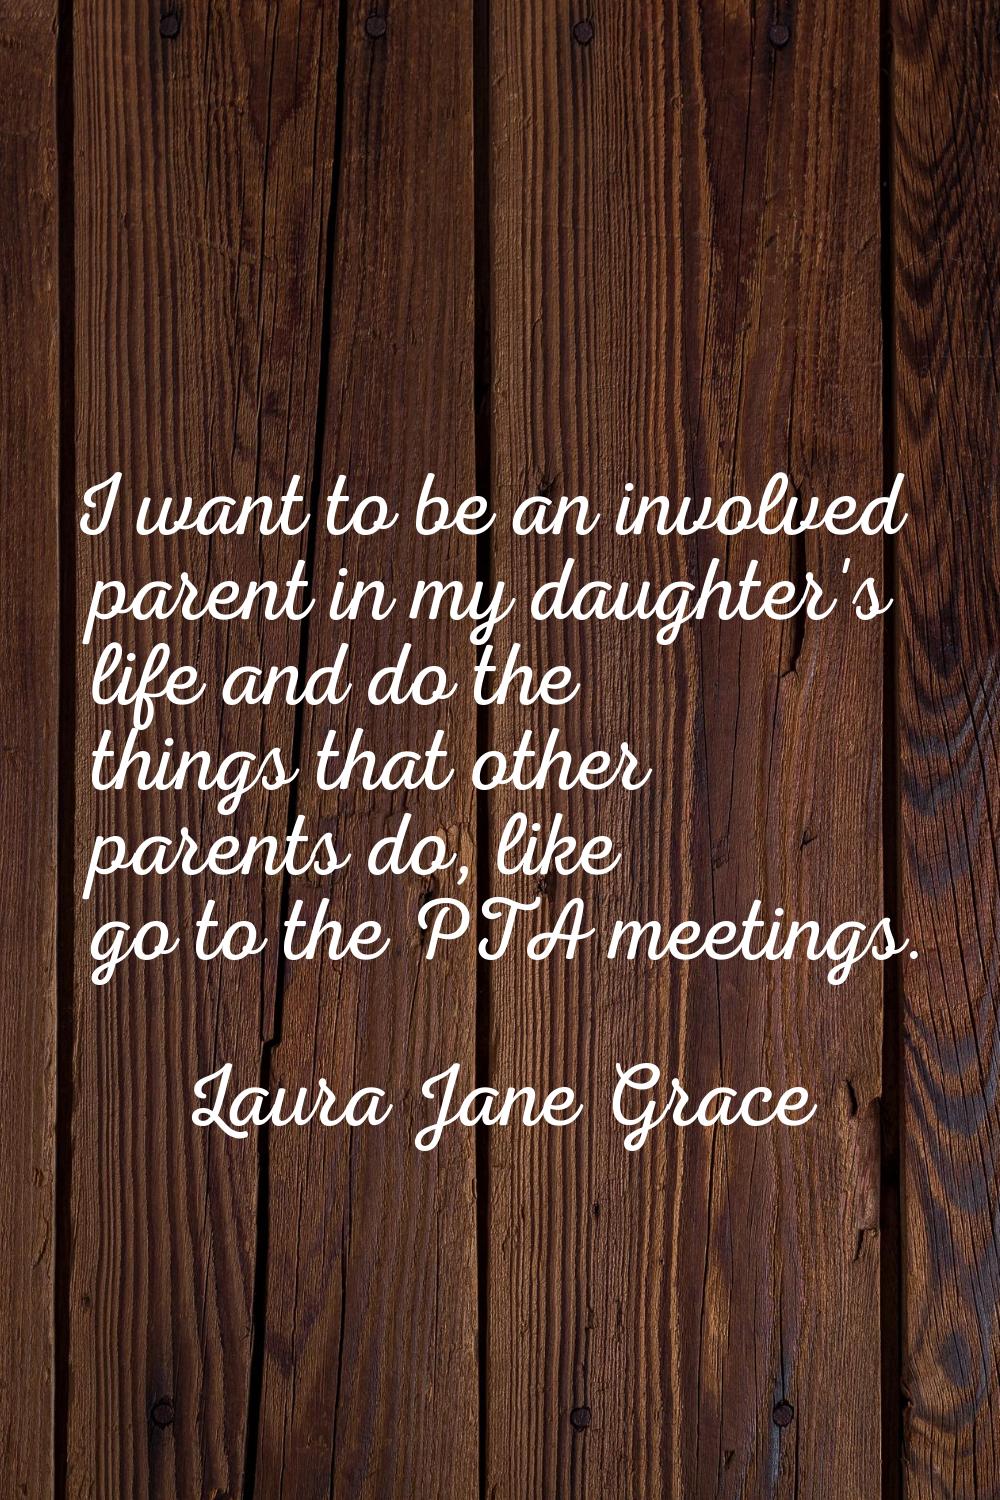 I want to be an involved parent in my daughter's life and do the things that other parents do, like